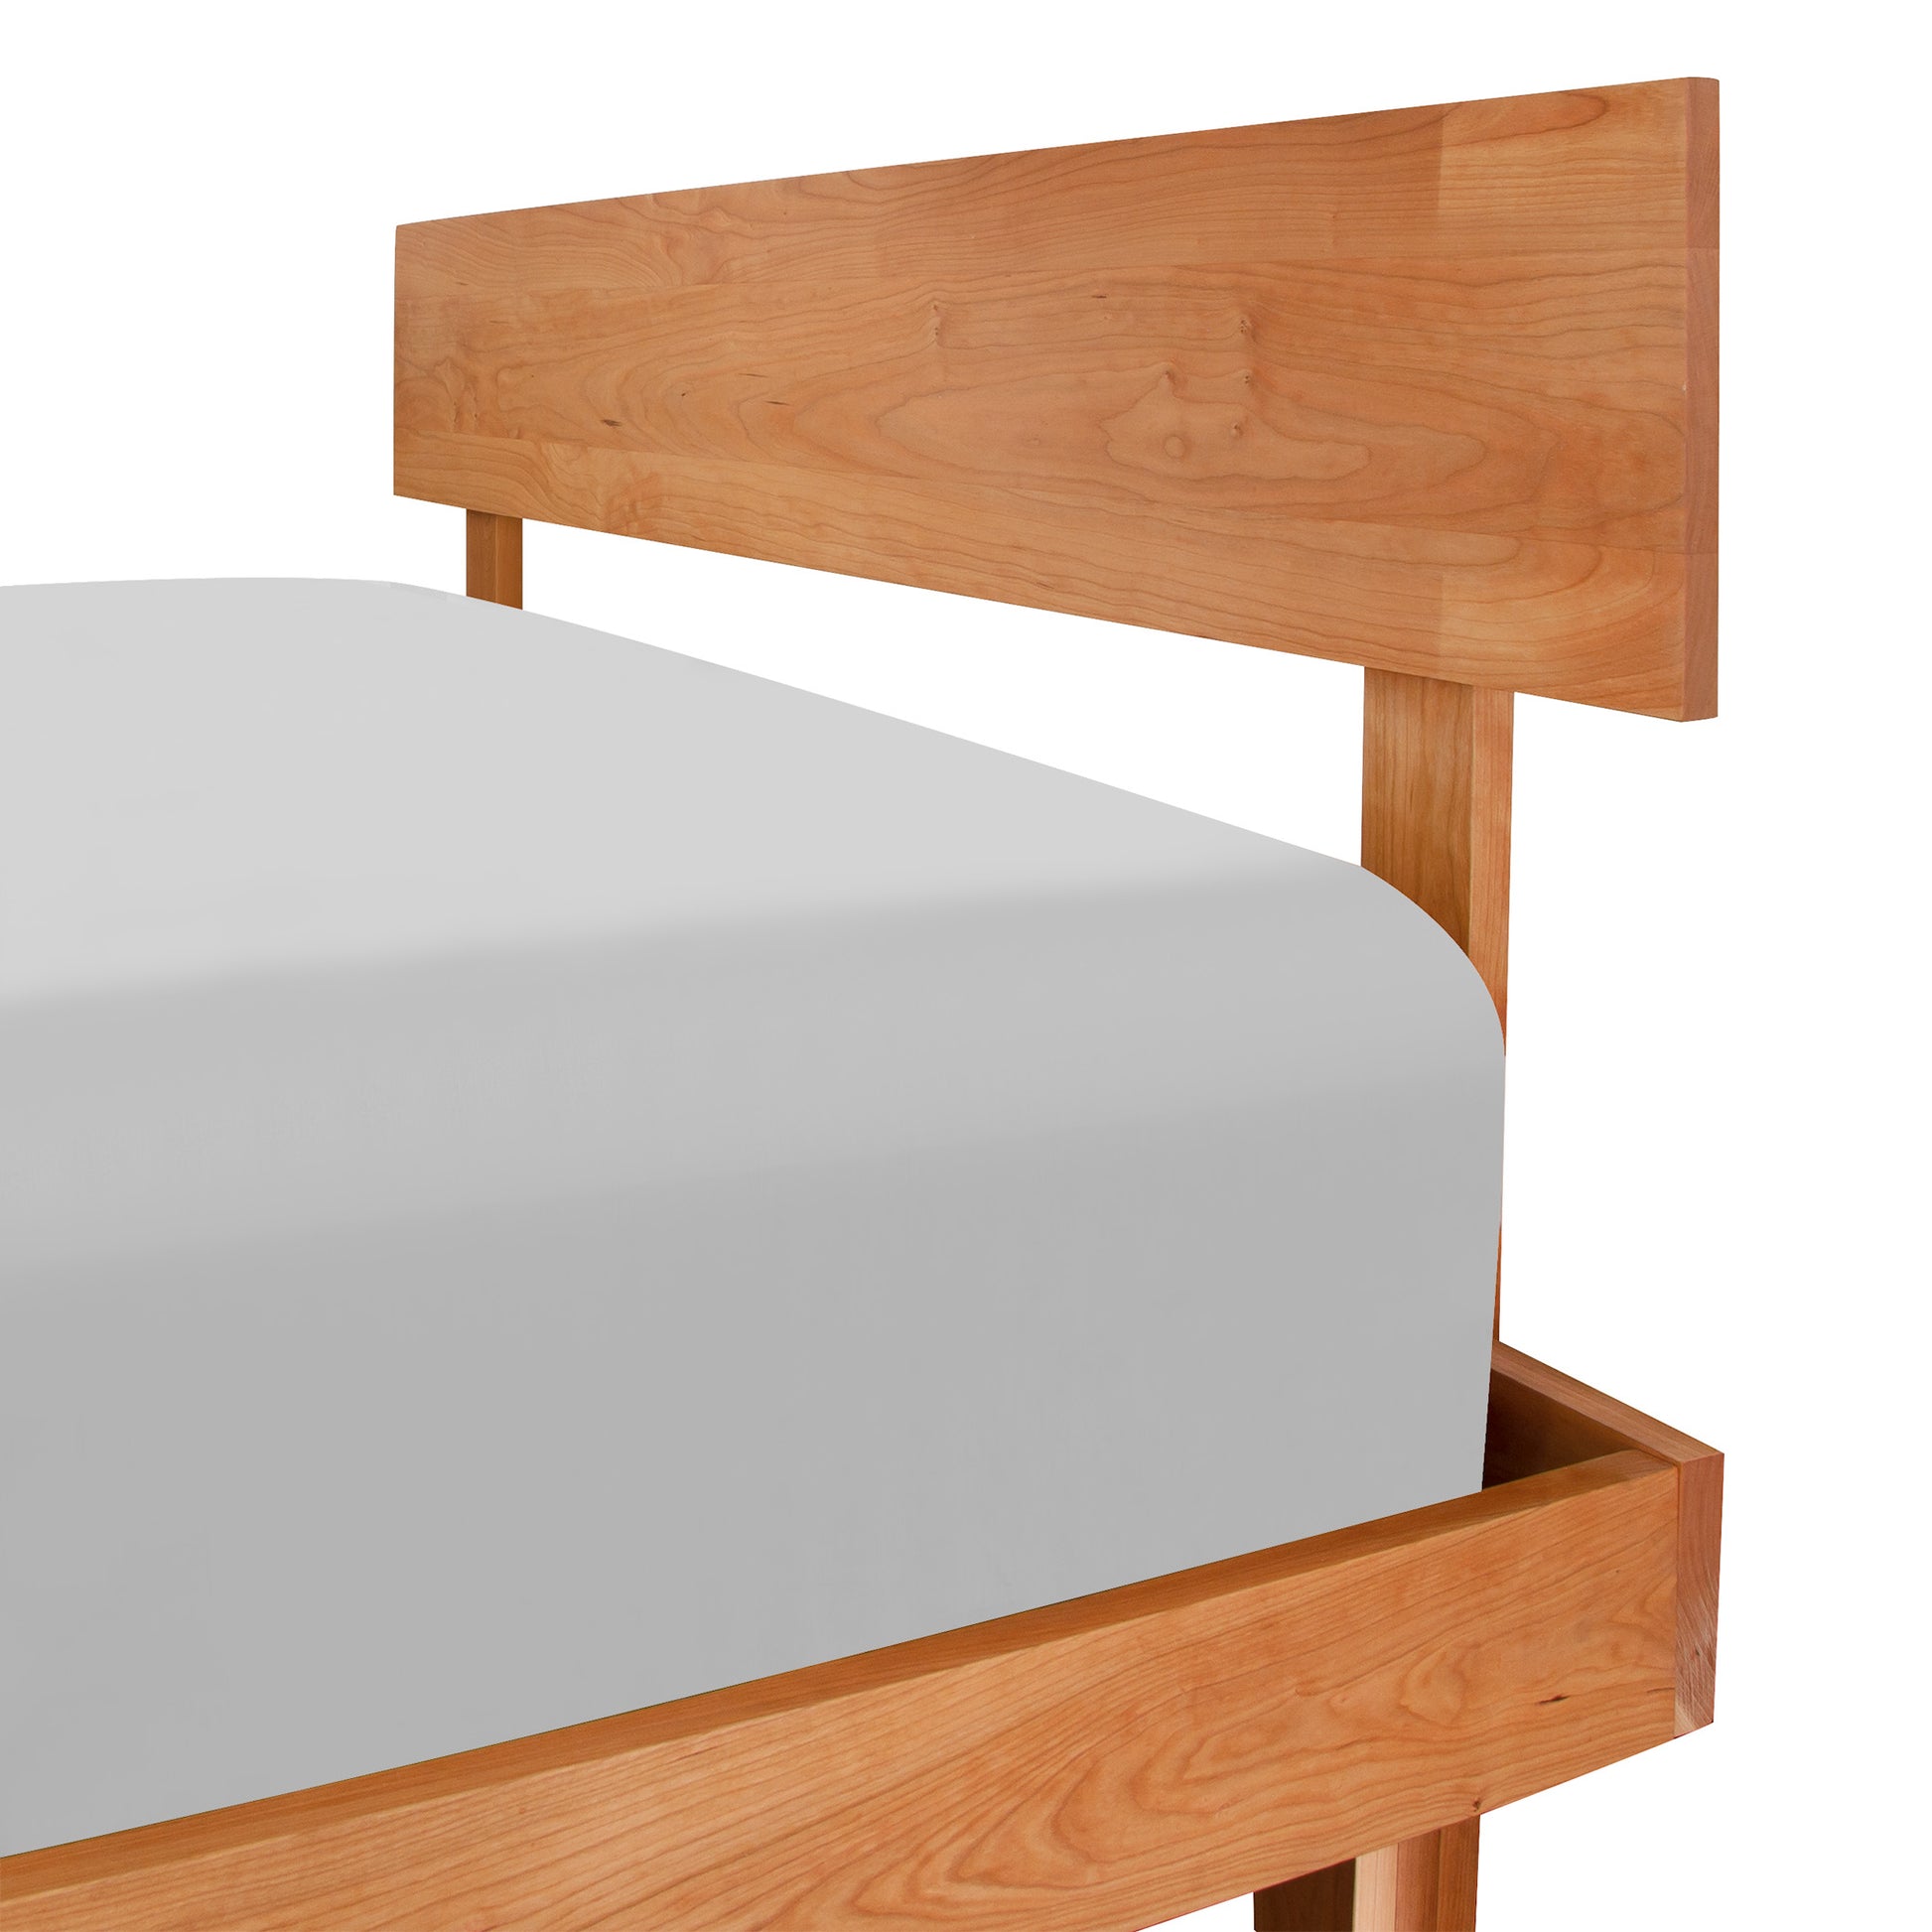 Solid wood Vermont Furniture Designs Kipling Platform Bed with a single mattress, isolated on a white background.